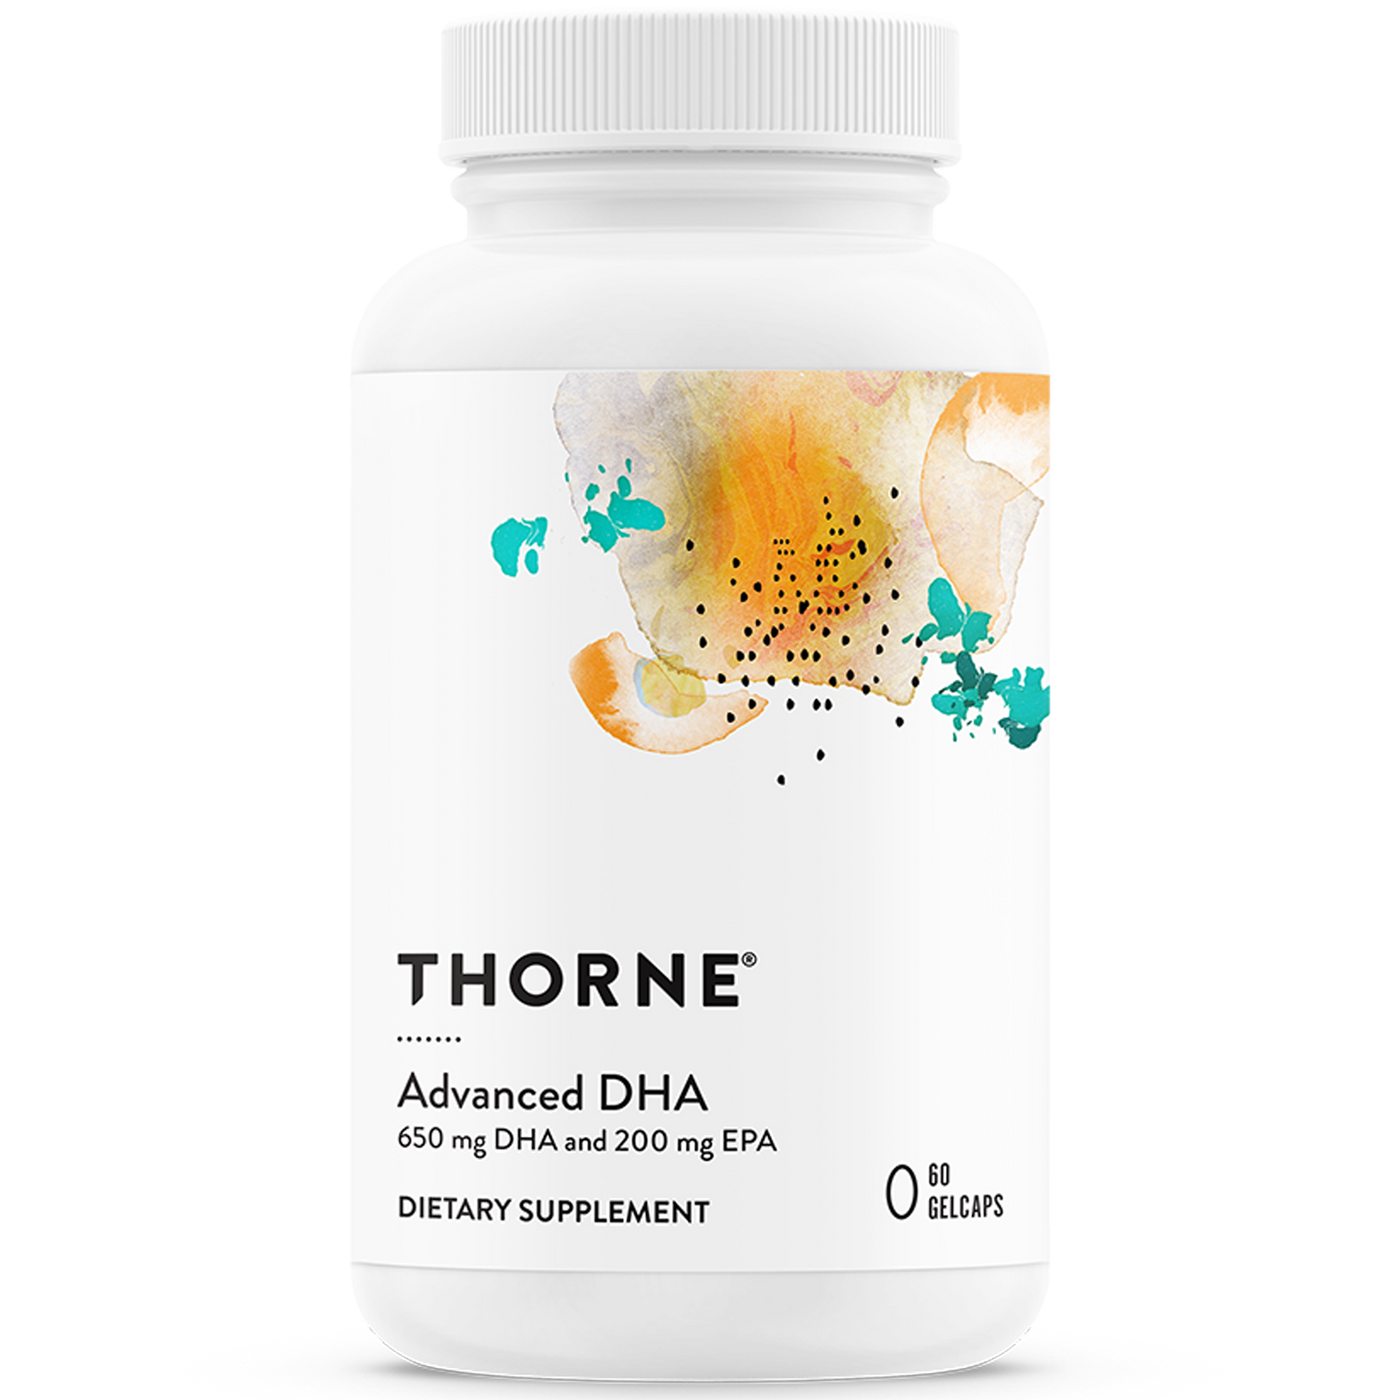 Advanced DHA 60 gelcaps Curated Wellness